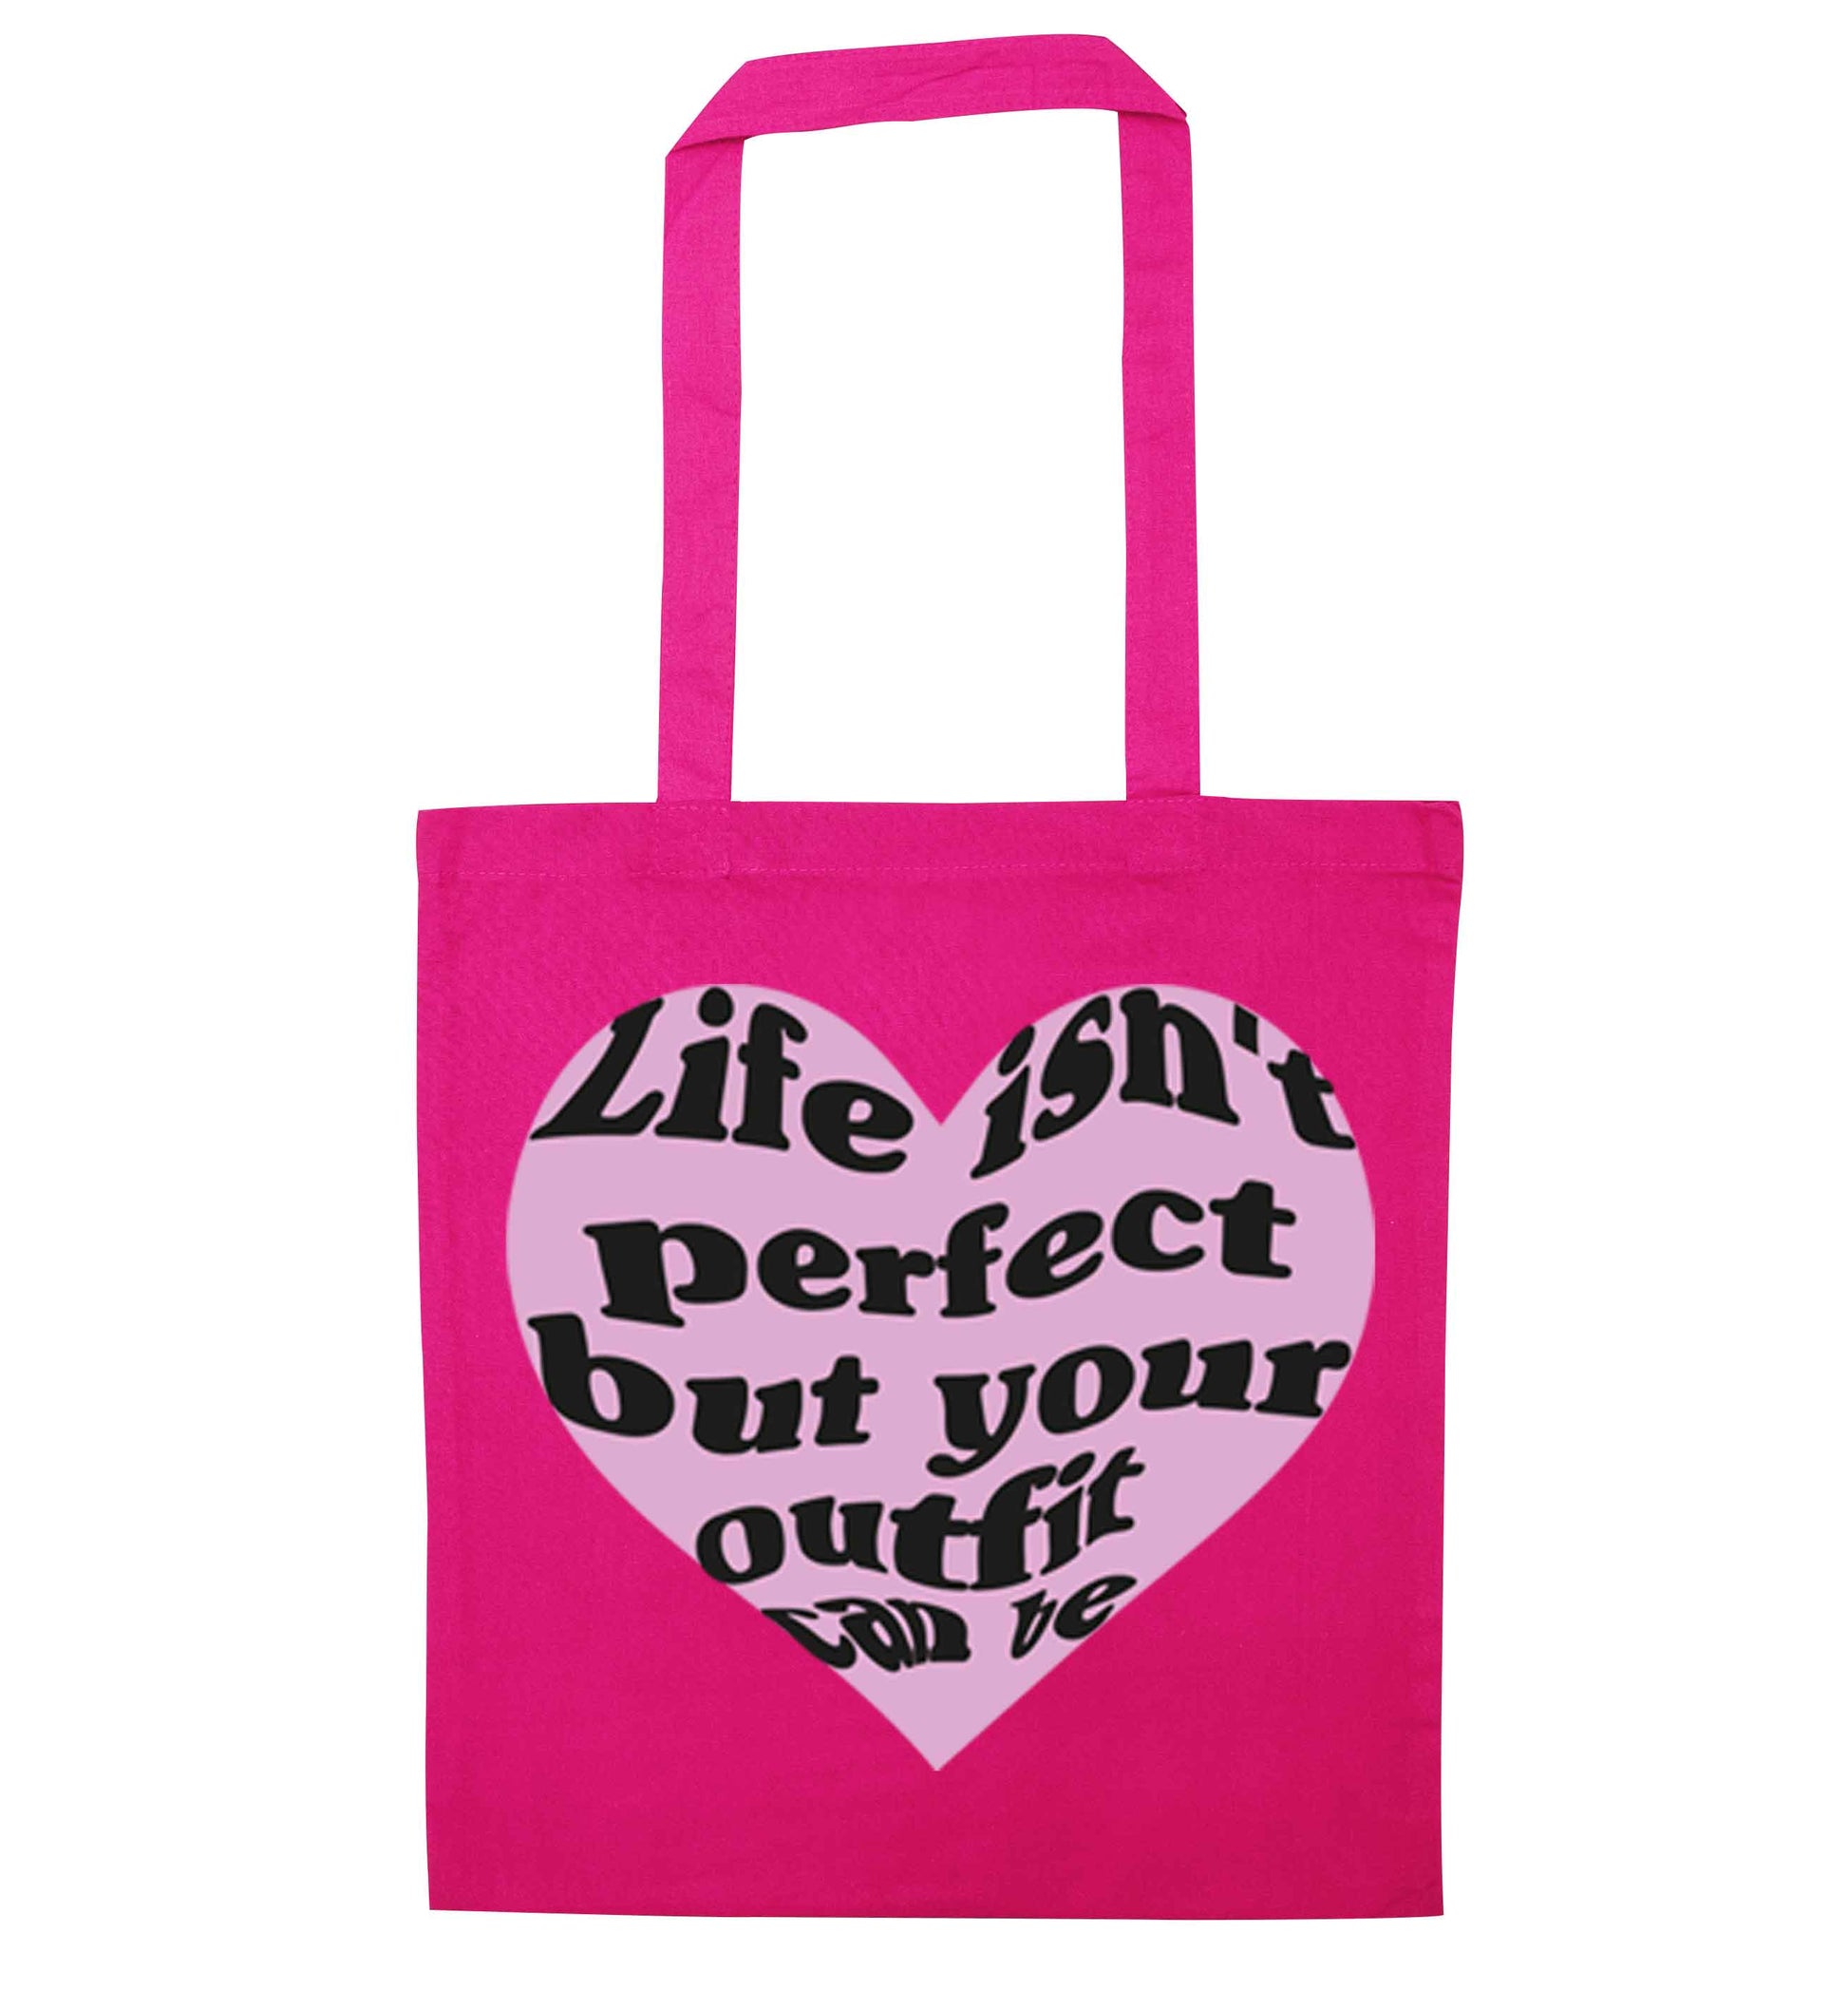 Life isn't perfect but your outfit can be pink tote bag